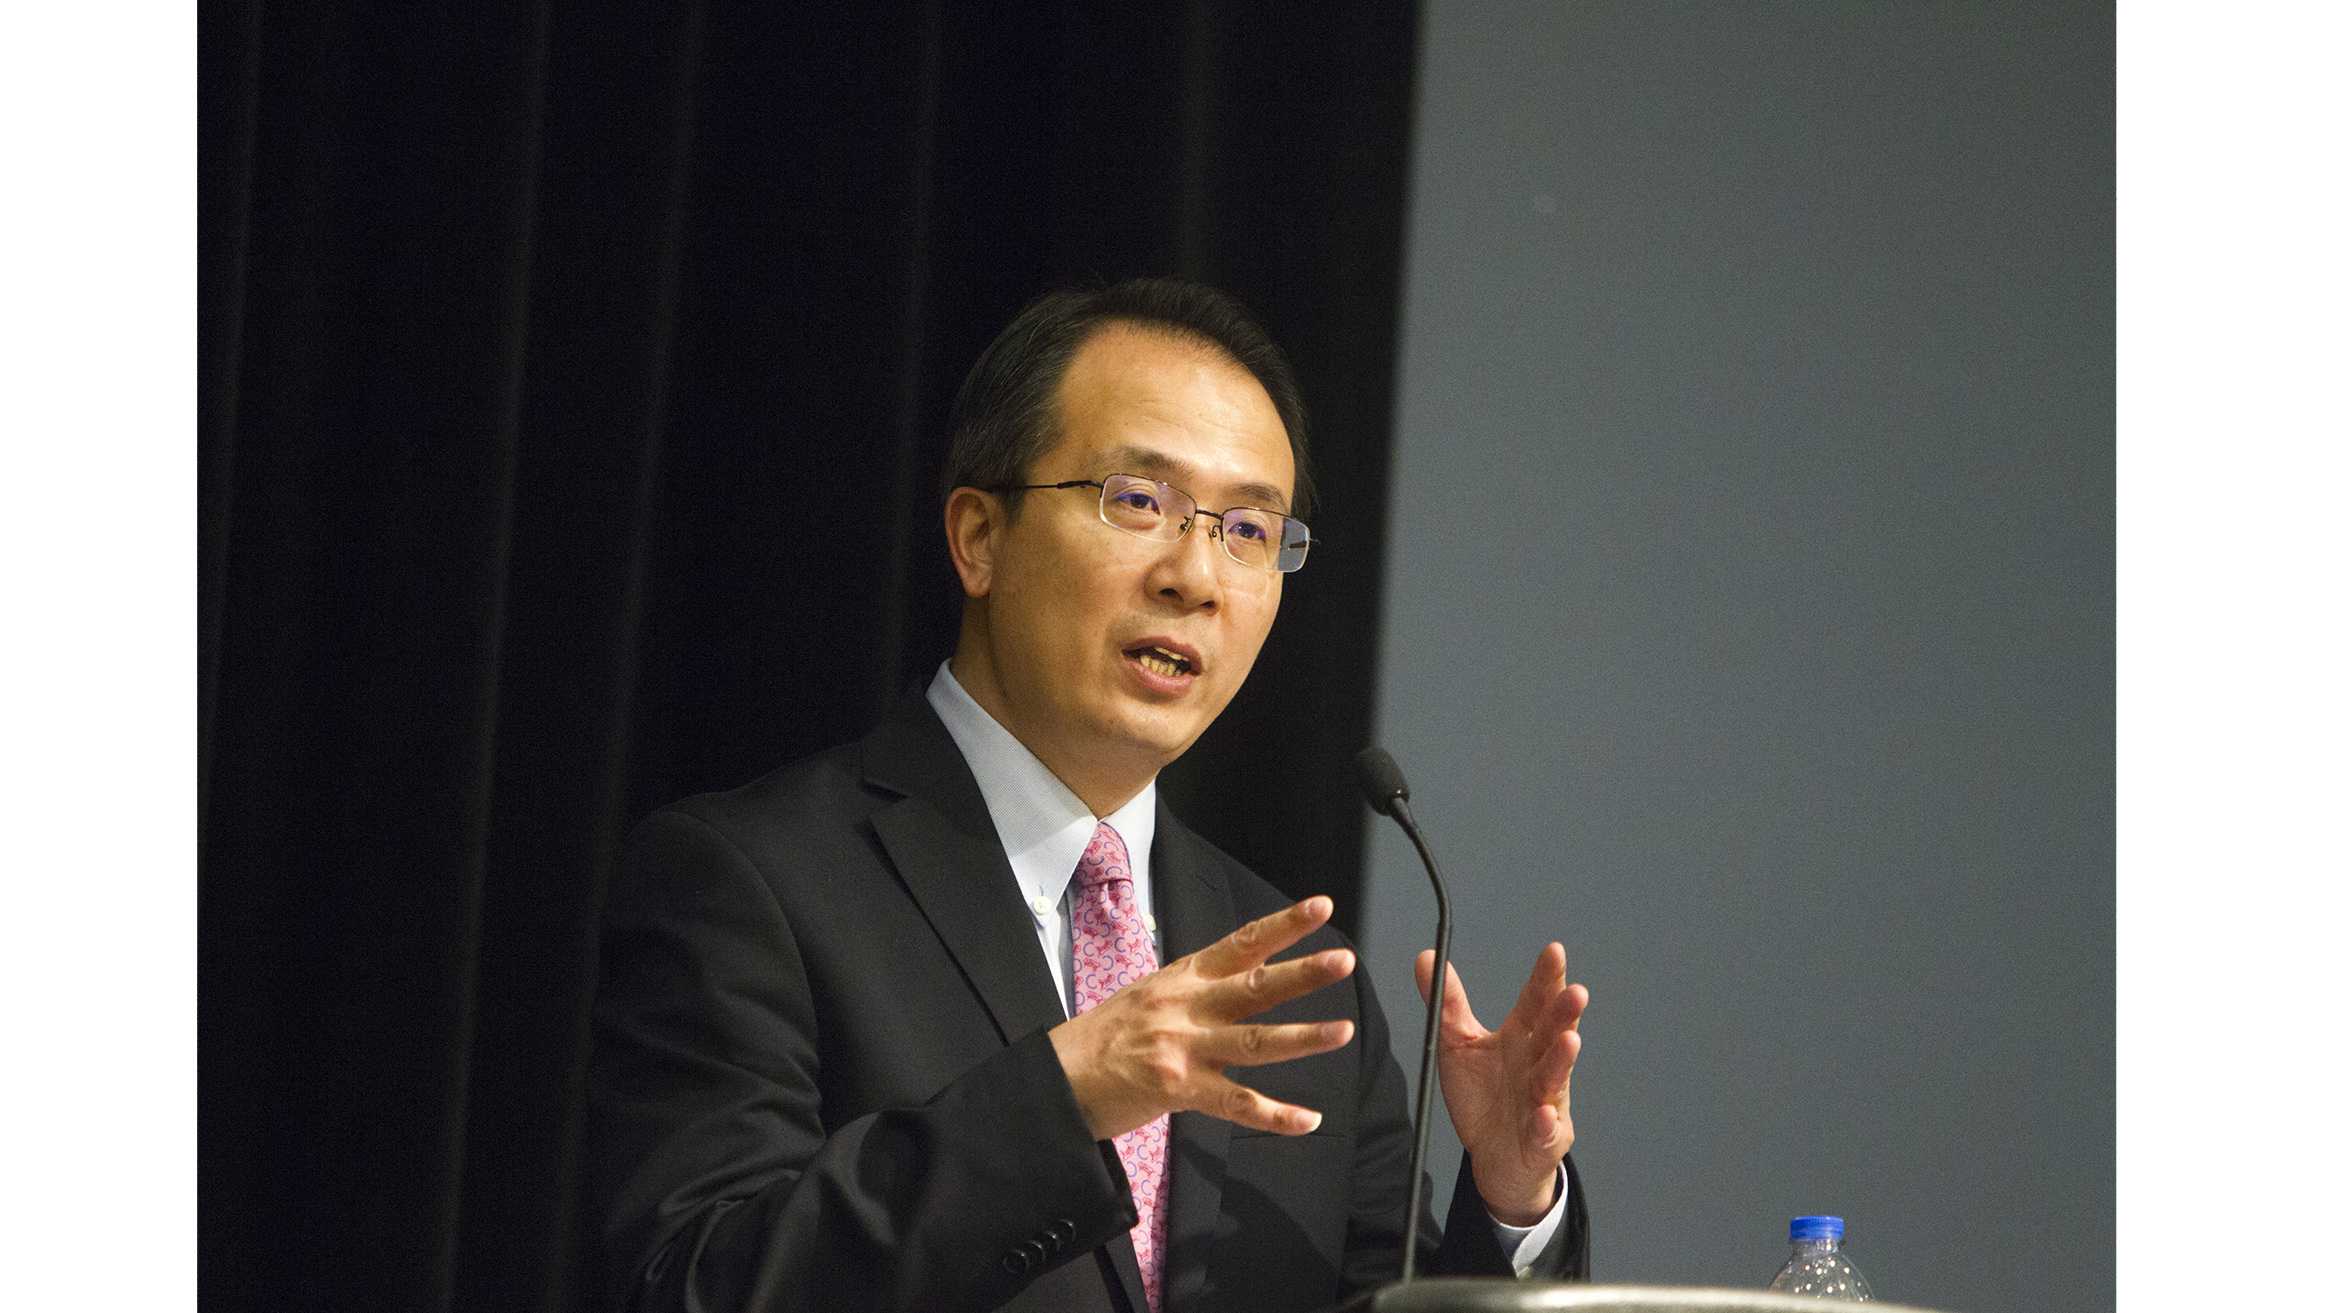 Consul General Hong Lei was giving his lecture about new developments in China and Sino-U.S. Relations in IMU Ballrooms on Wednesday, May 2nd, 2018. (Gaoyuan Pan/ The Daily Iowan)